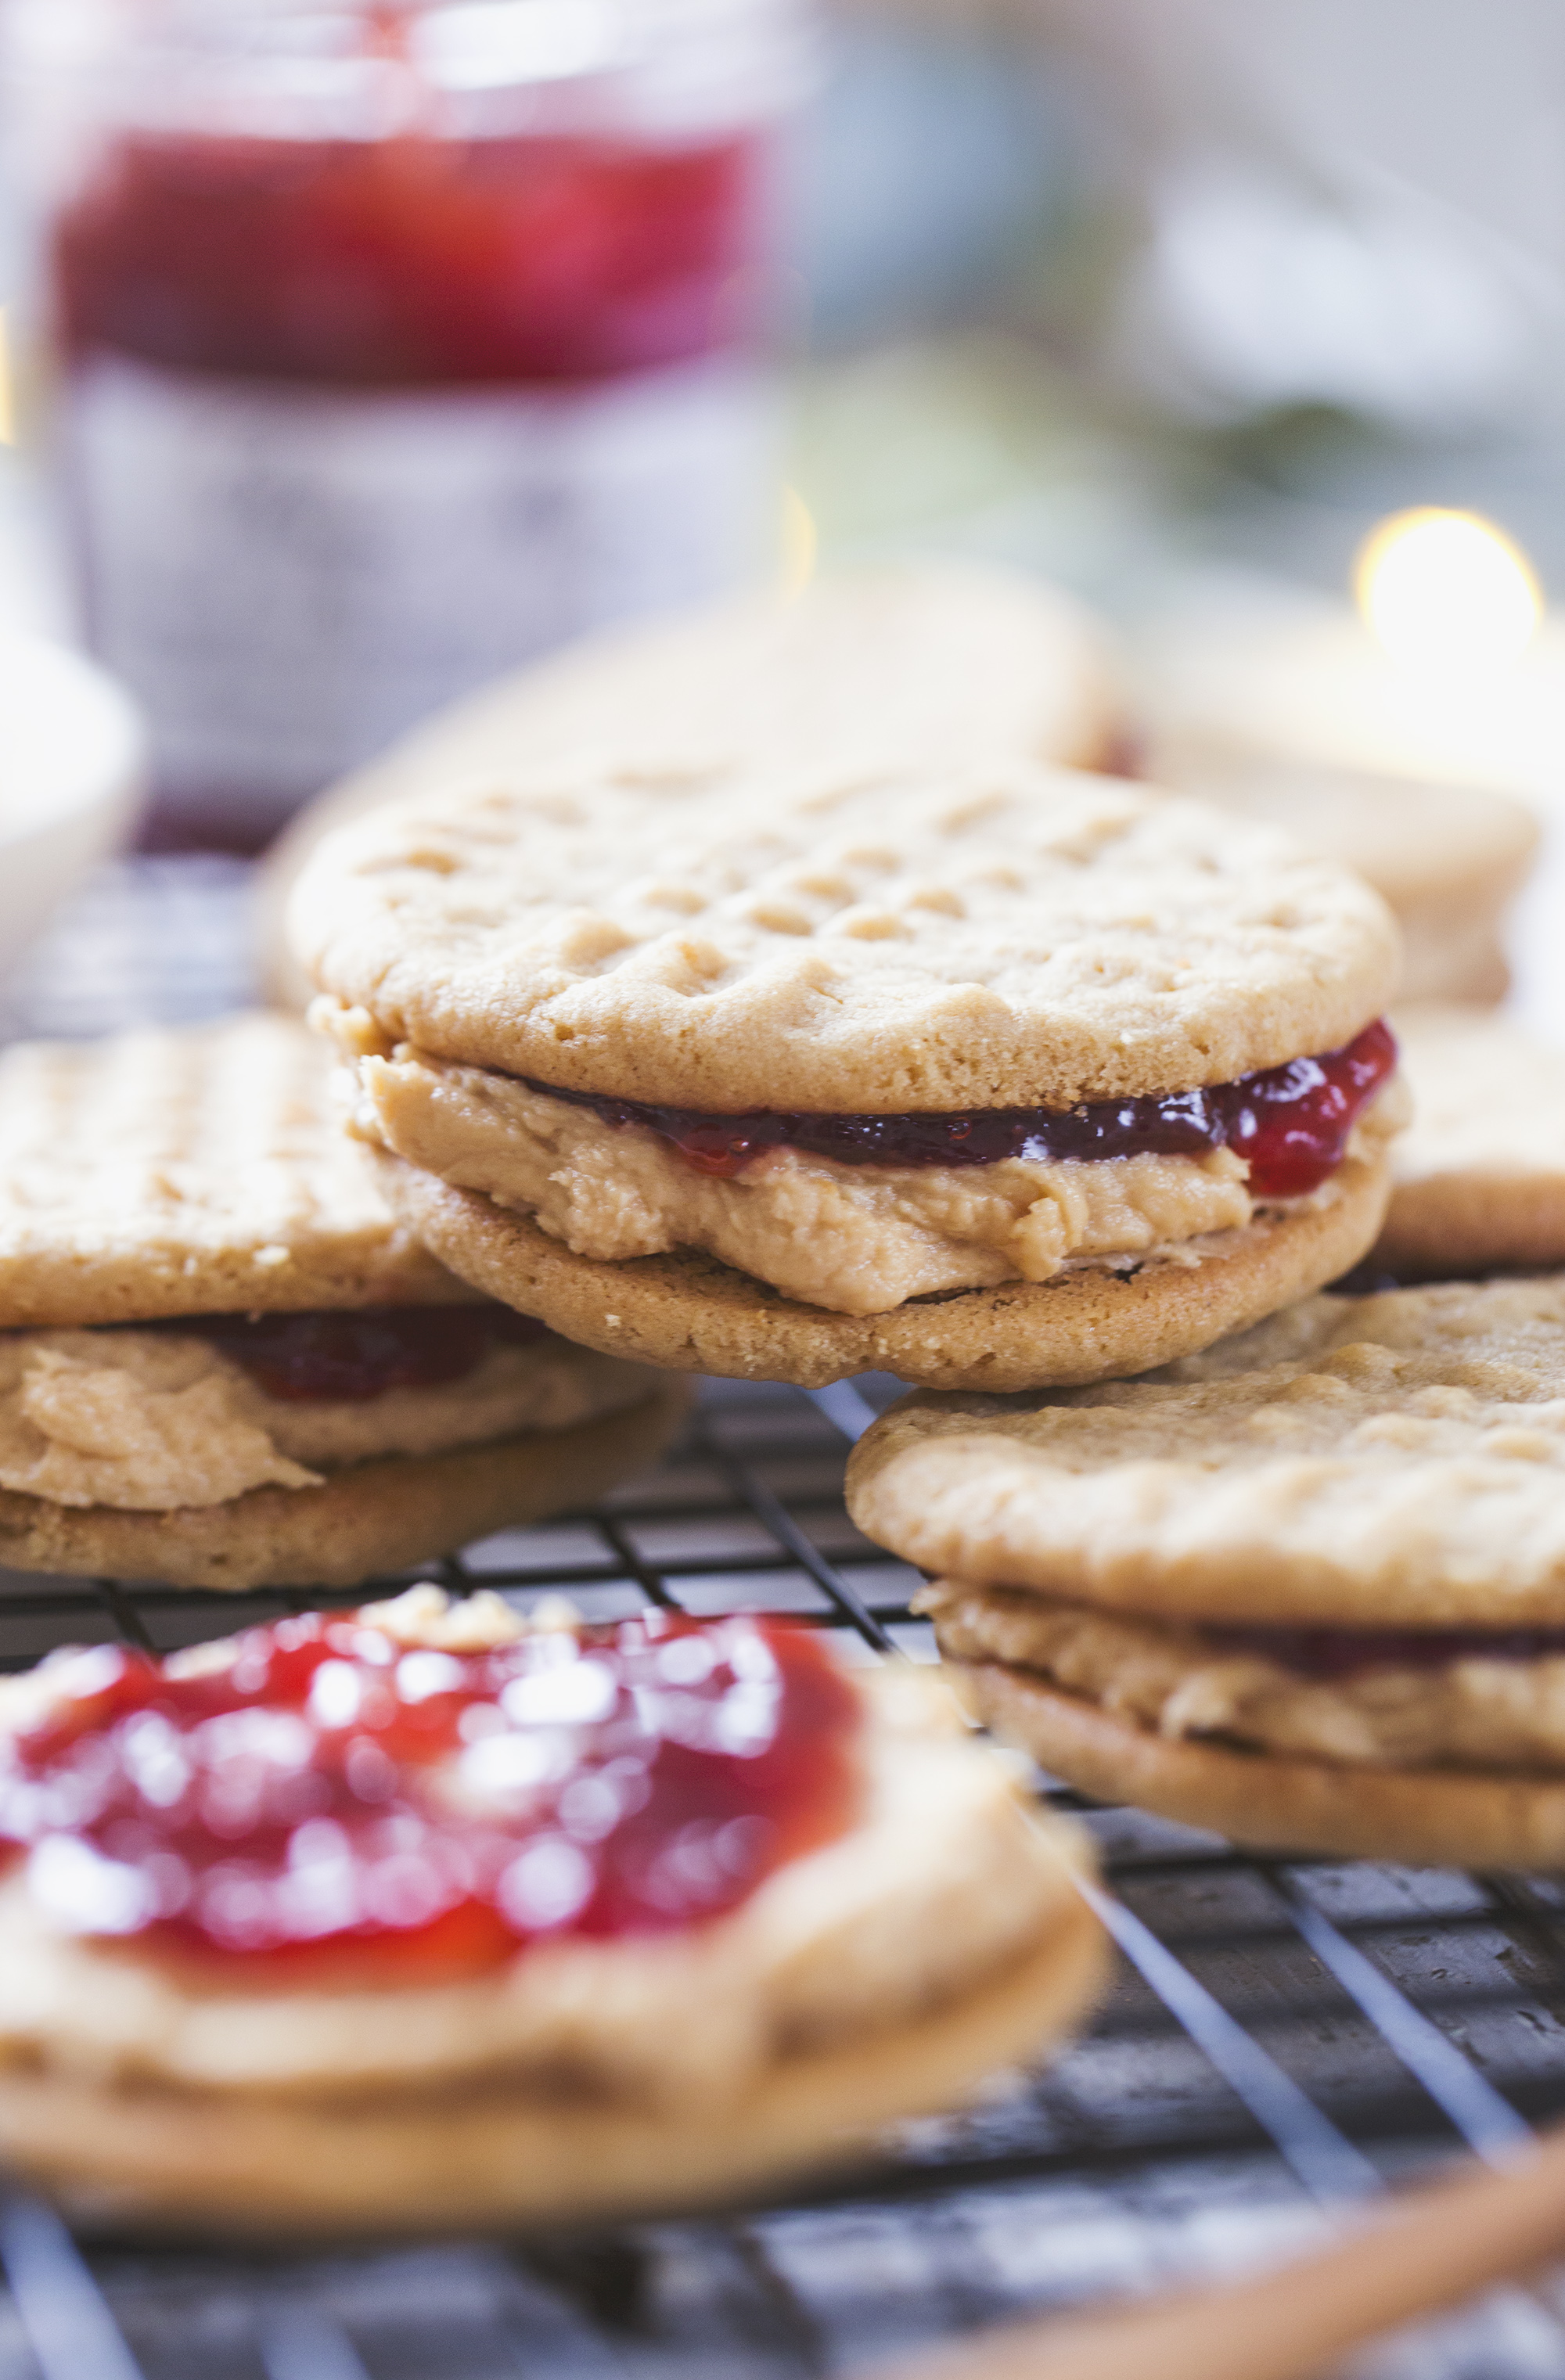 Peanut Butter & Bonne Maman Jelly Filled Cookies